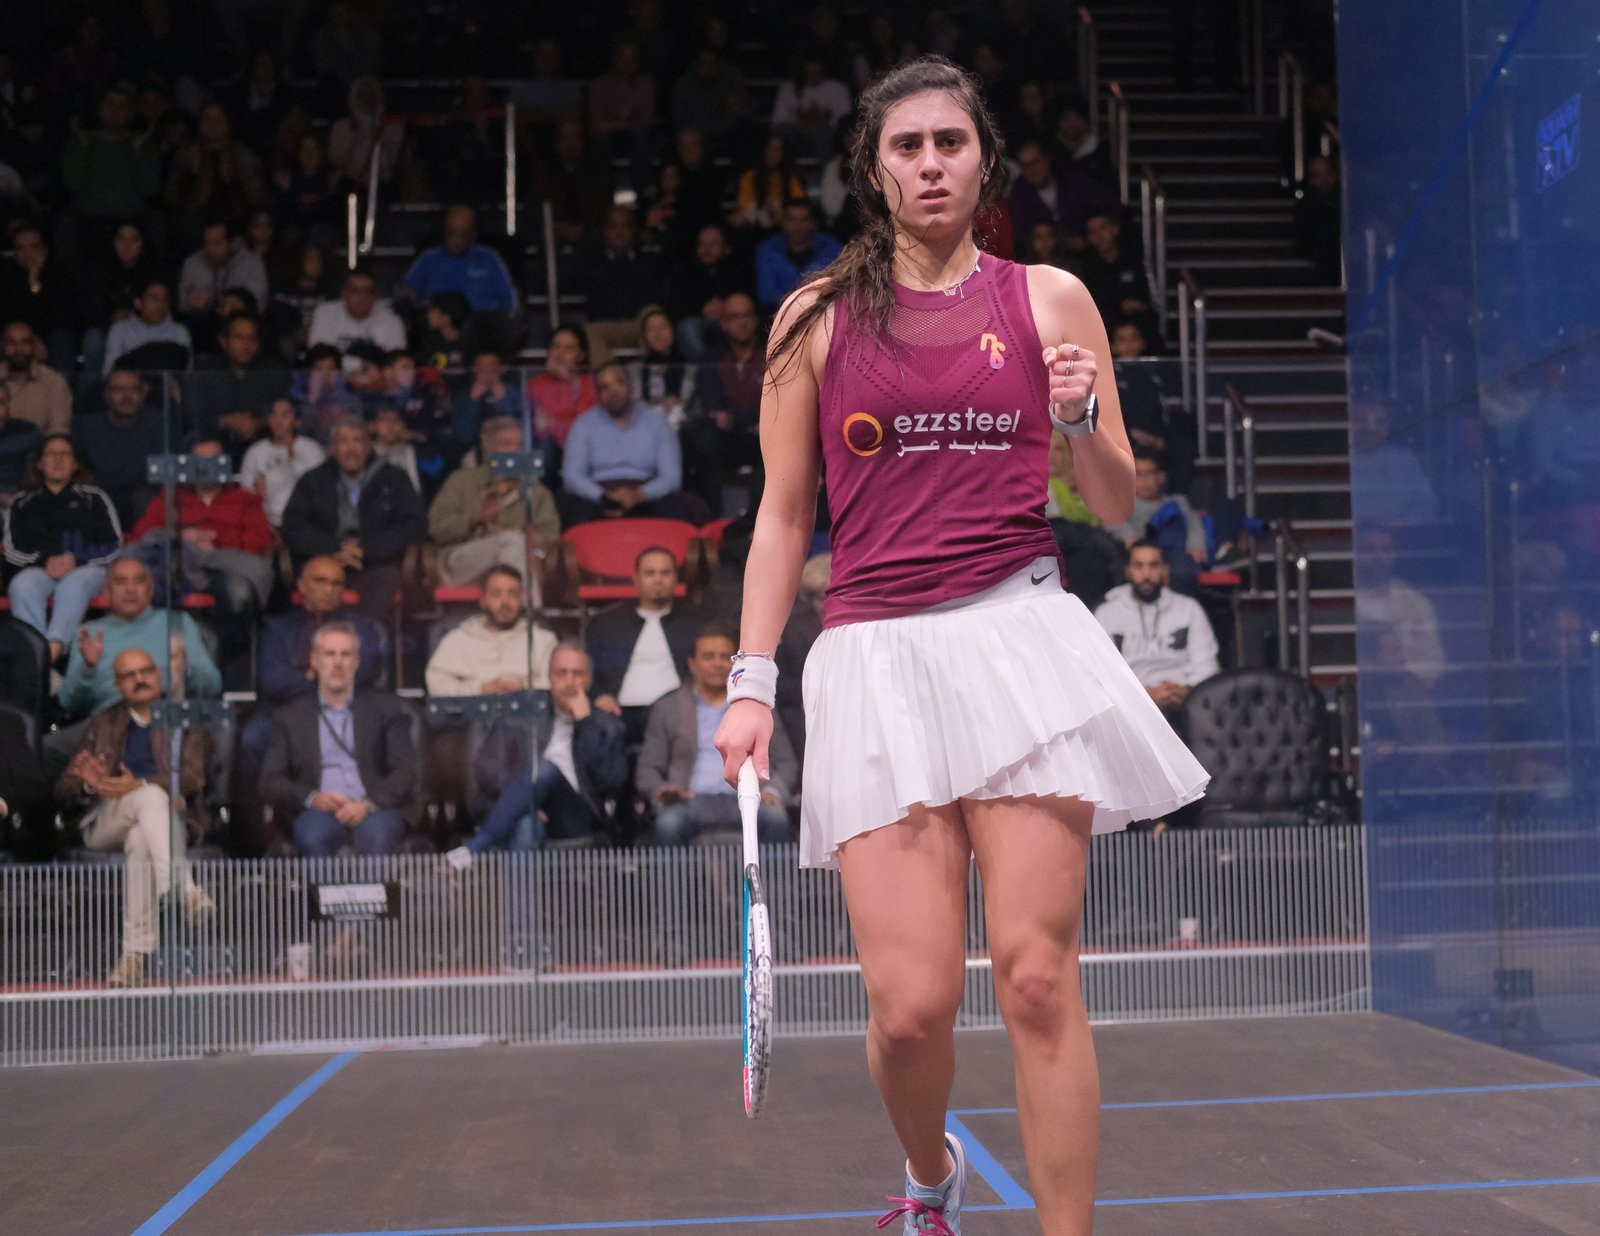 World champion Nour El Sherbini recovered from a game down to defeat compatriot Nour El Tayeb ©PSA